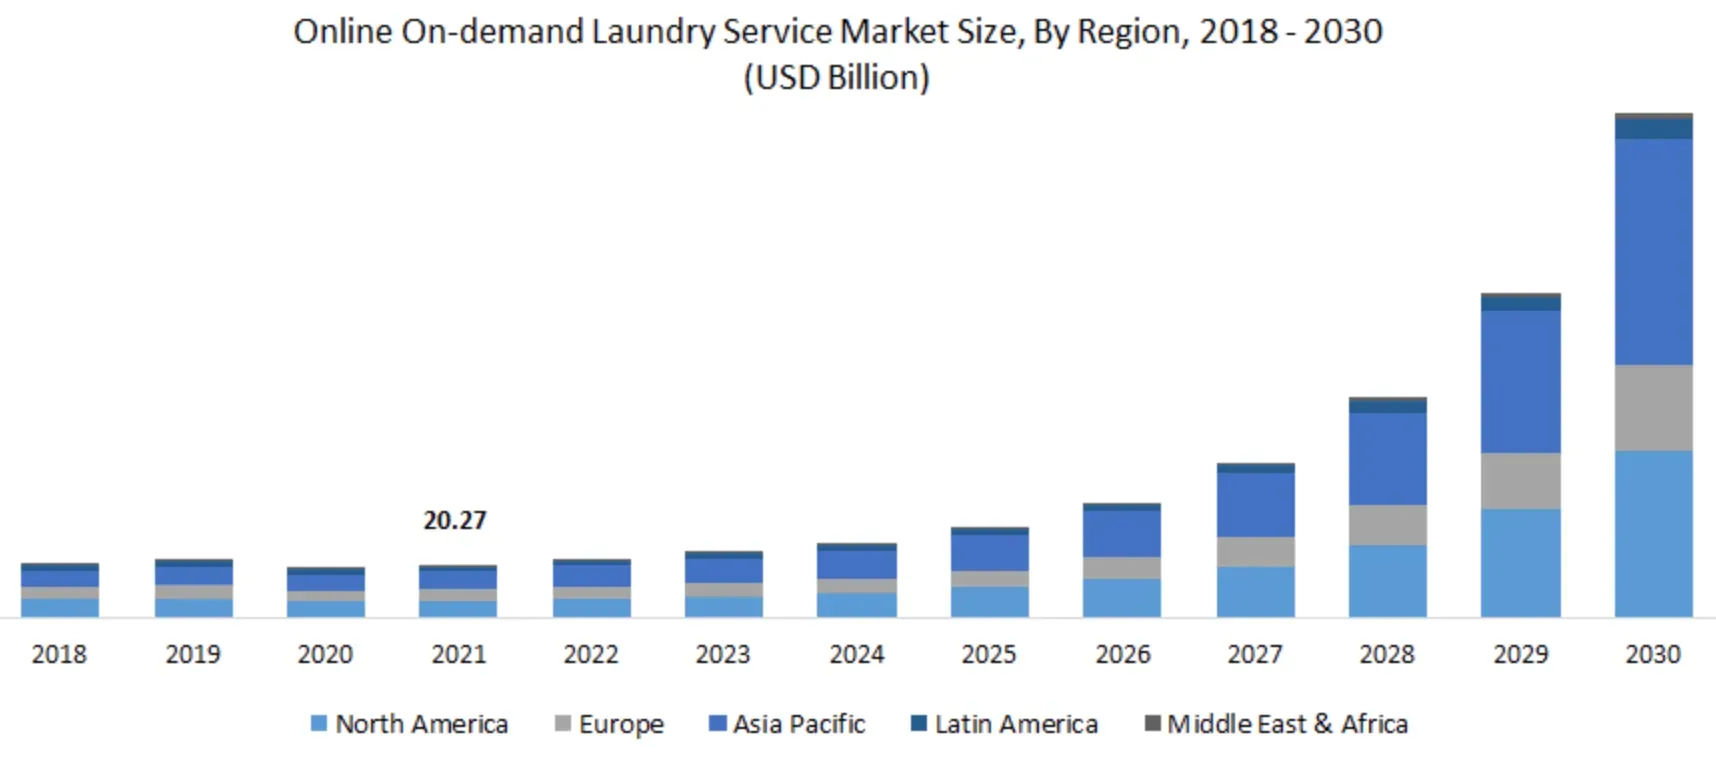 What is the potential for growth for a laundry delivery service?